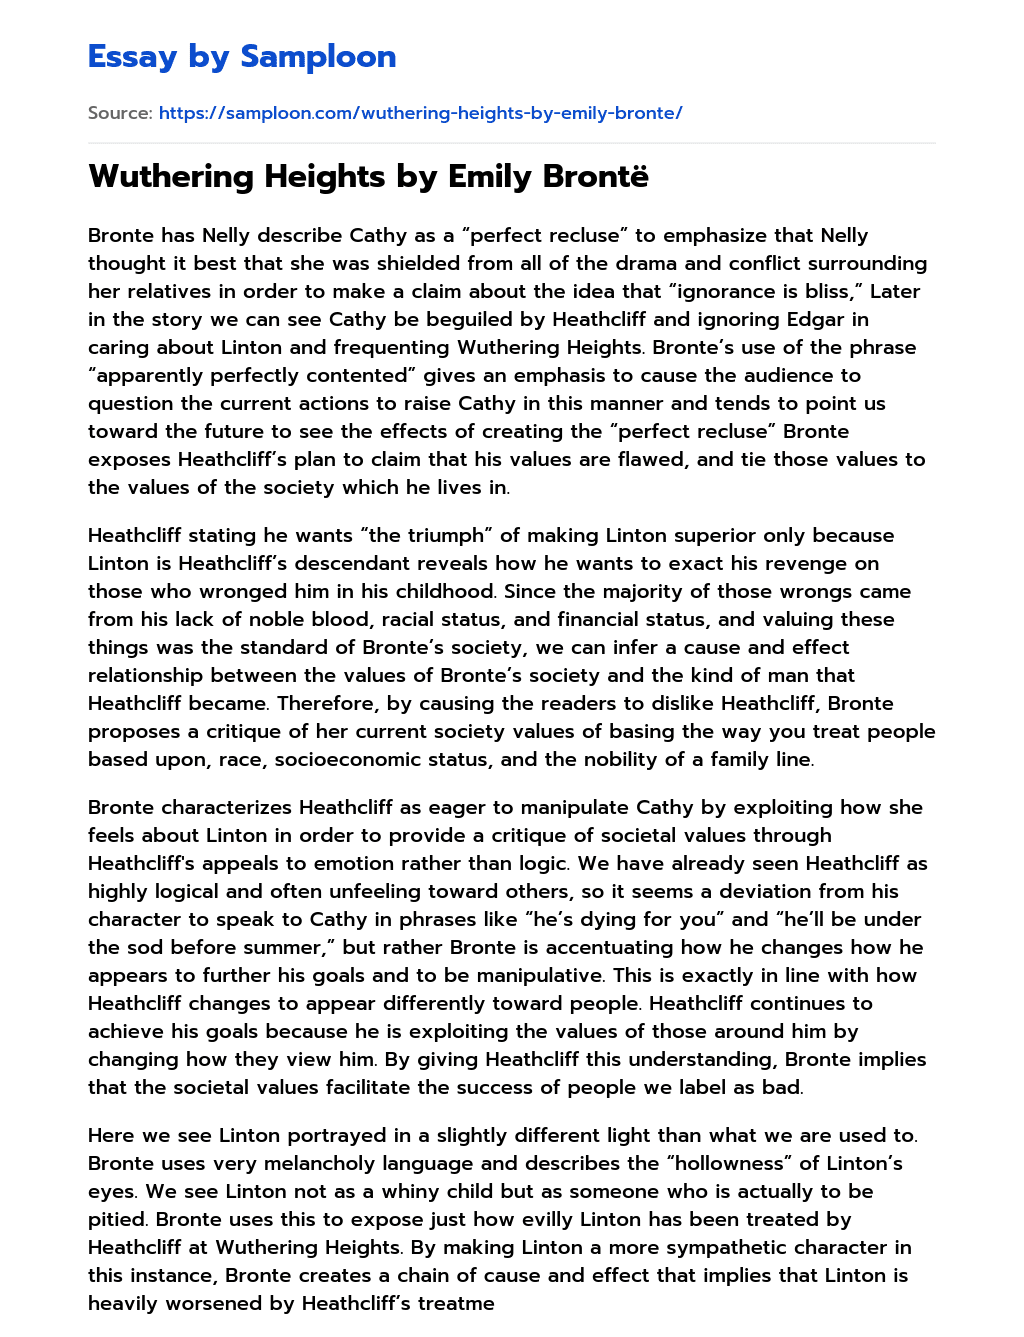 Wuthering Heights by Emily Brontë essay